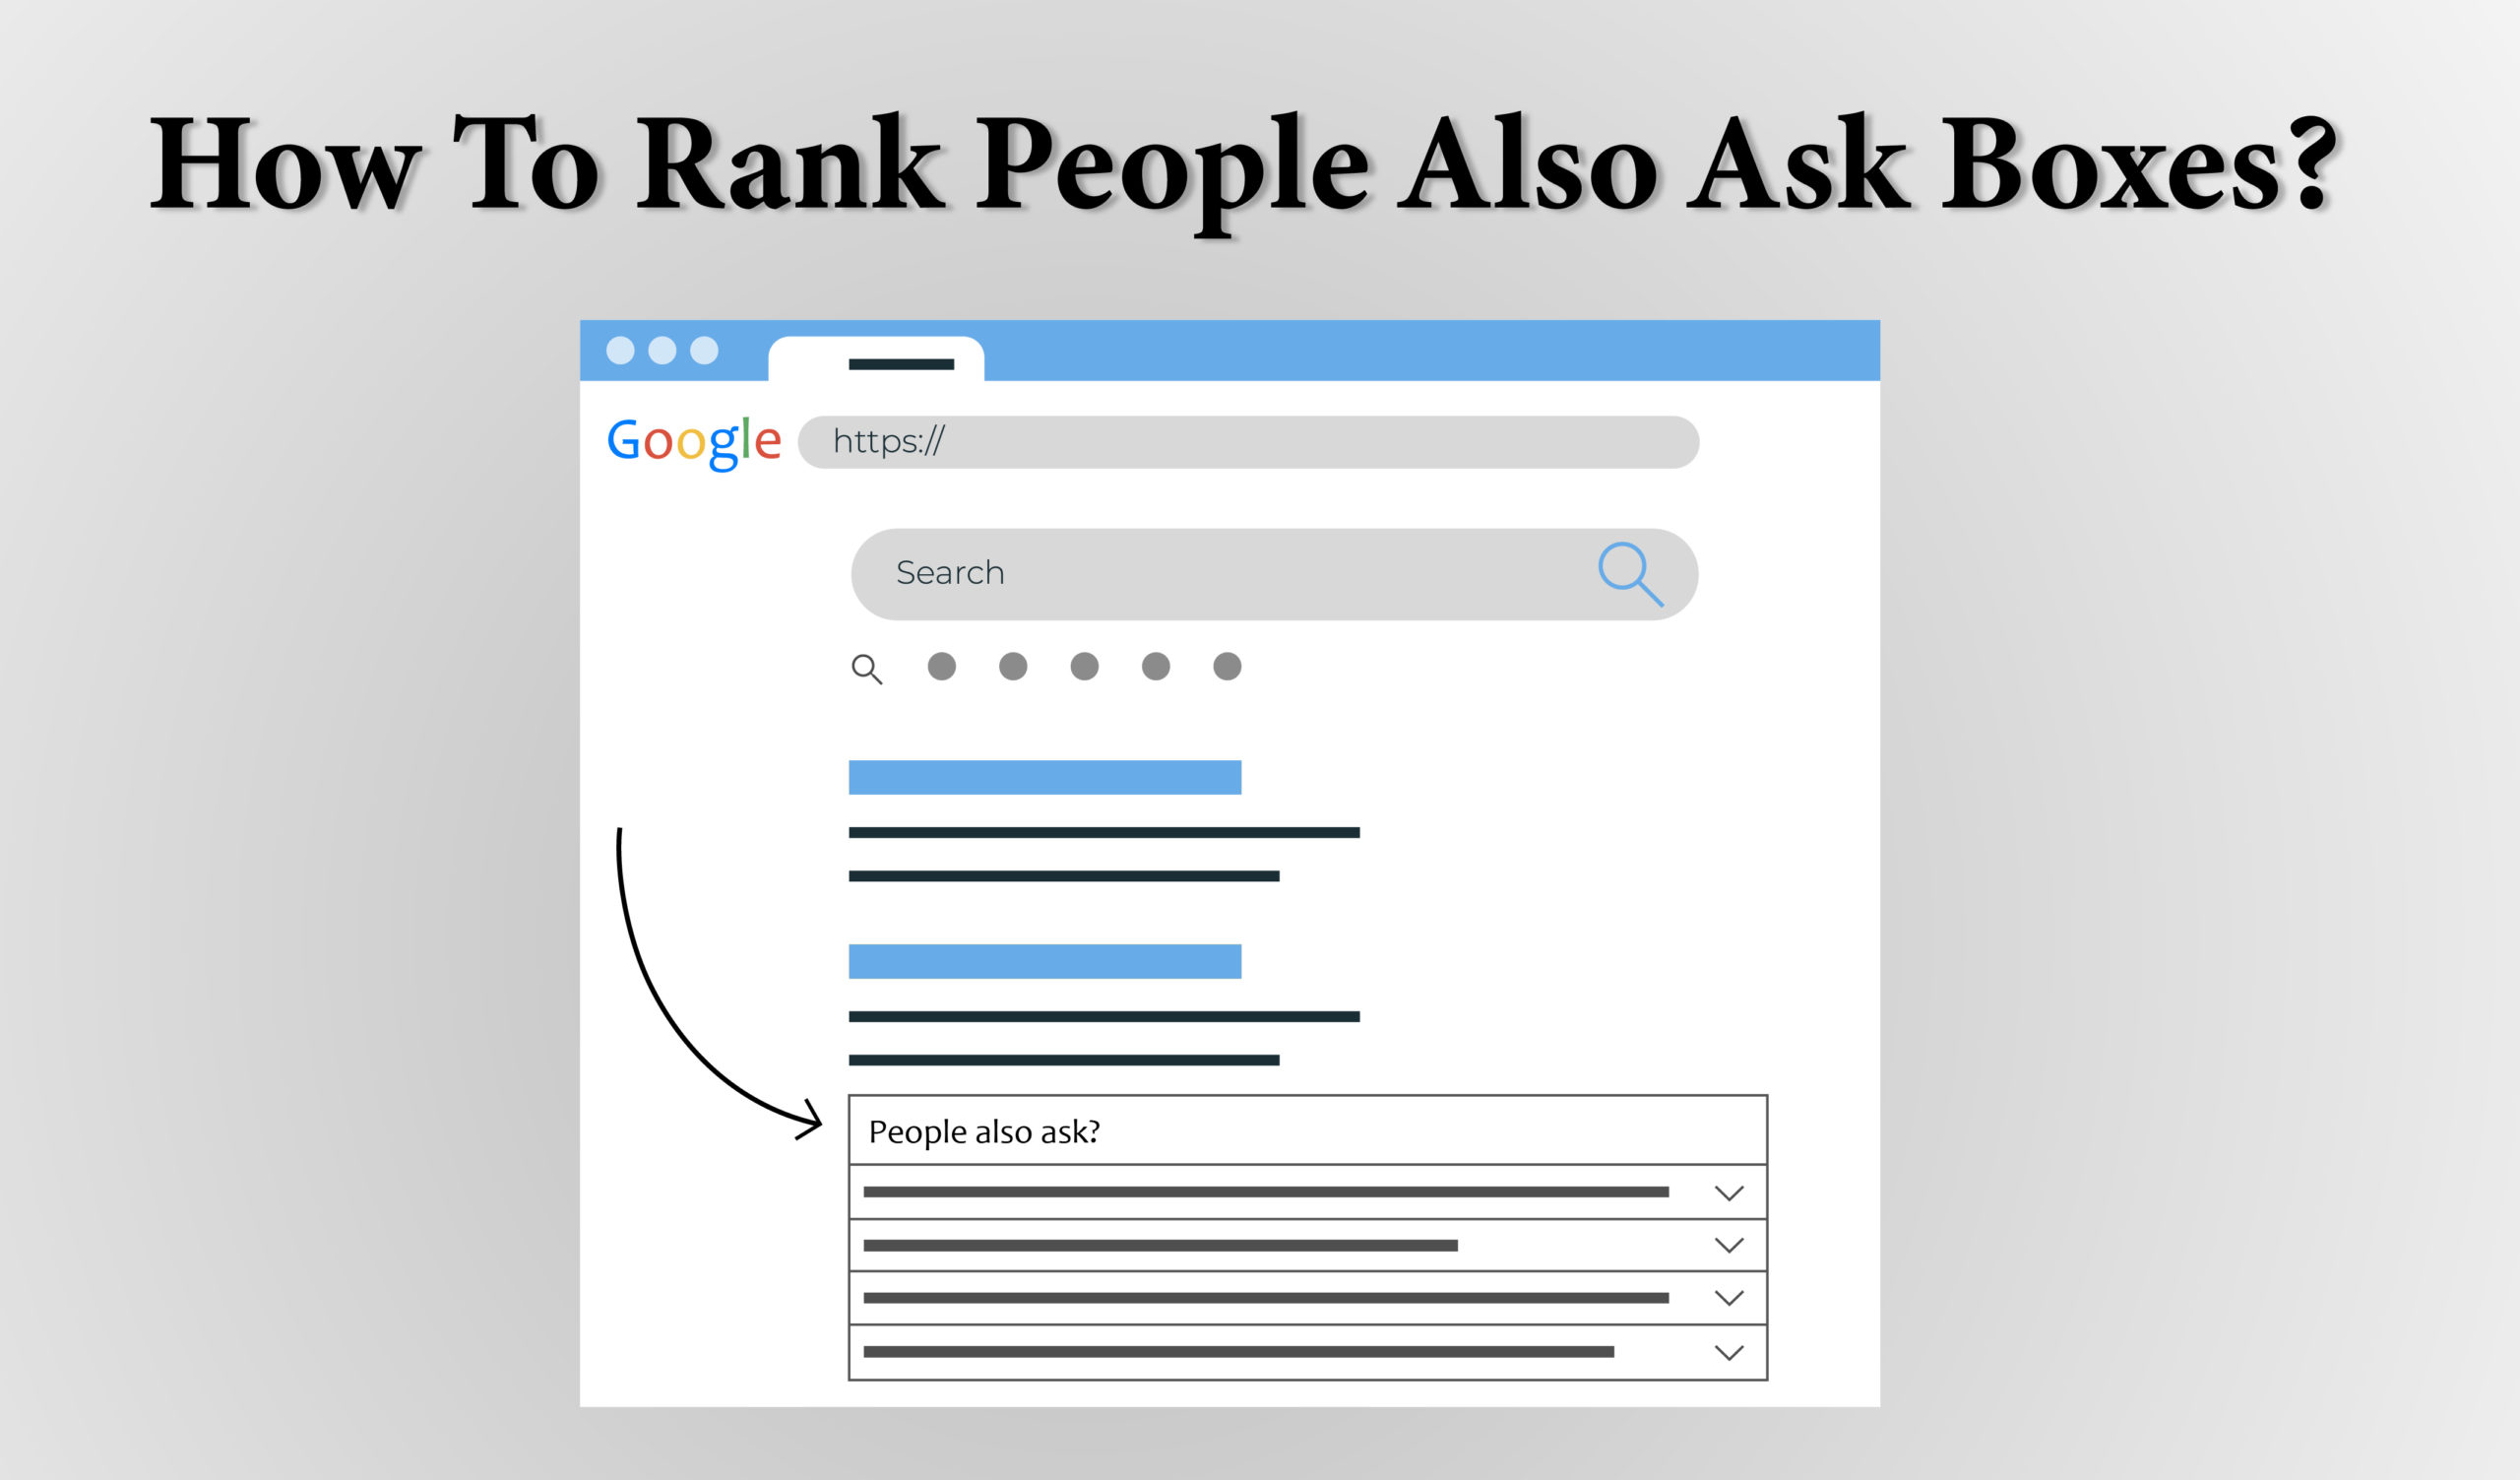 How to rank in ‘People Also Ask’ boxes?